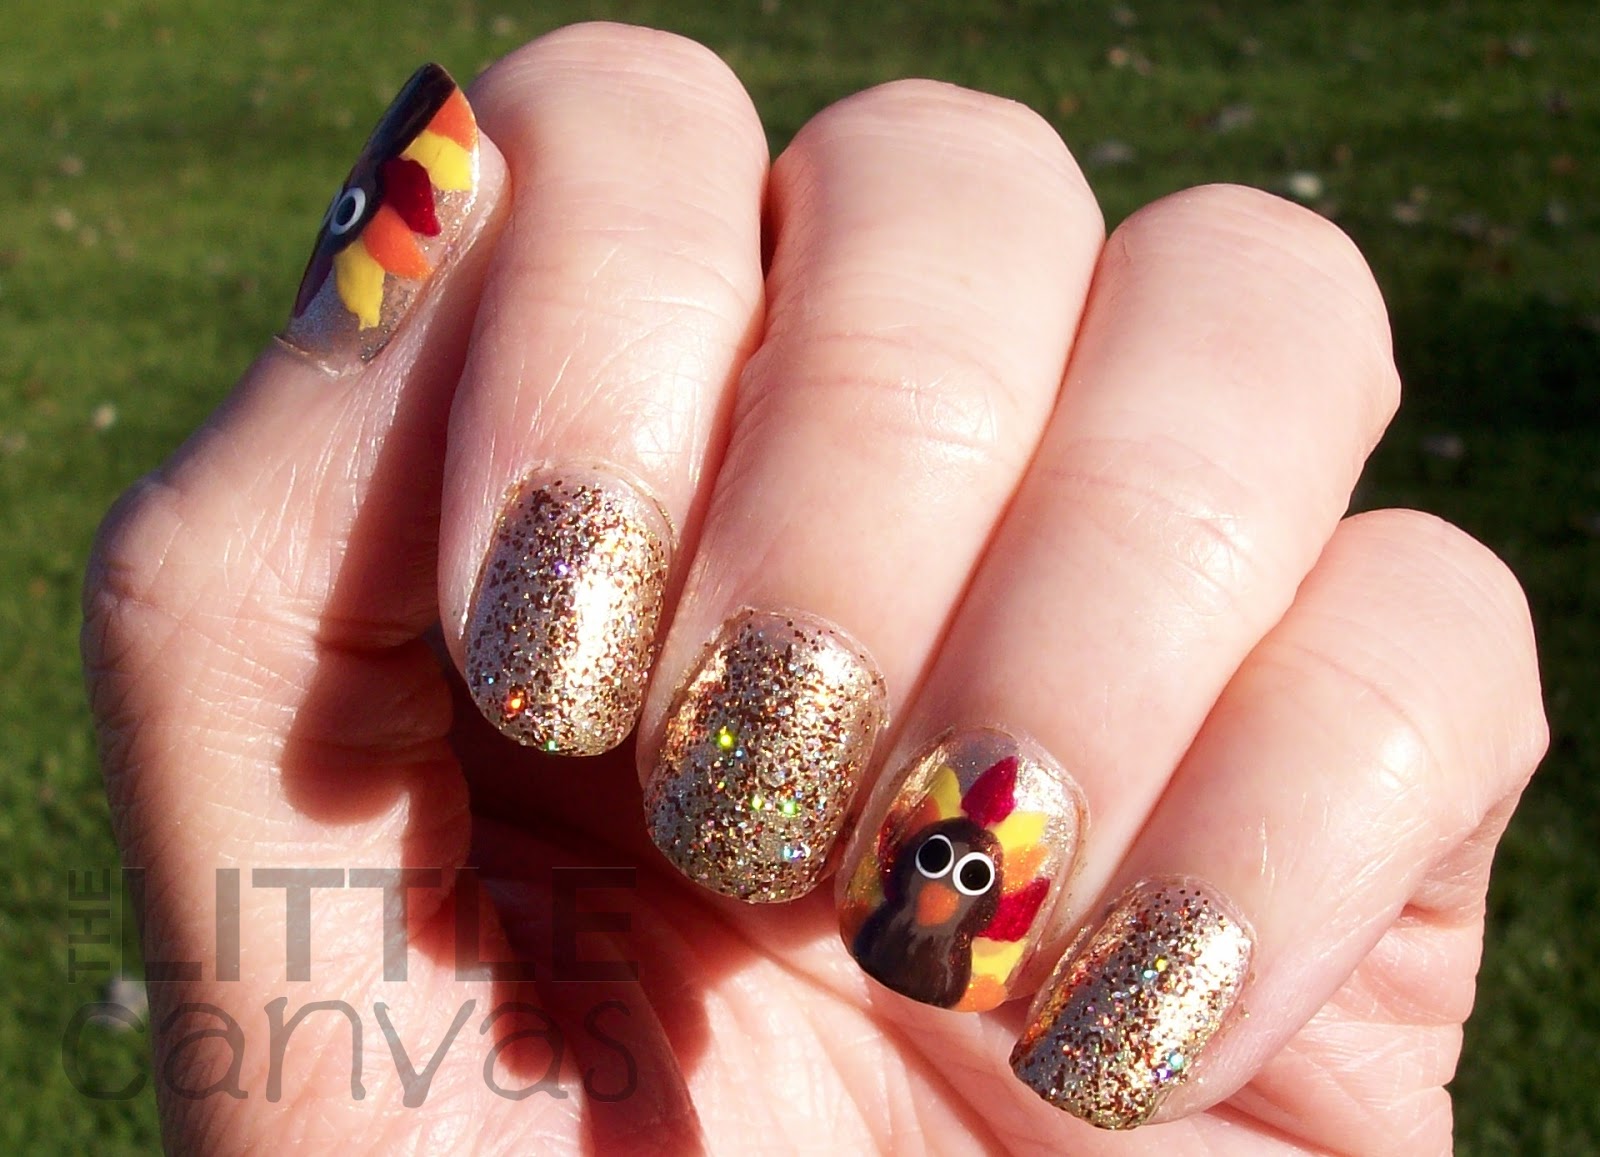 8. "Basic Color Thanksgiving Nail Trends" - wide 4